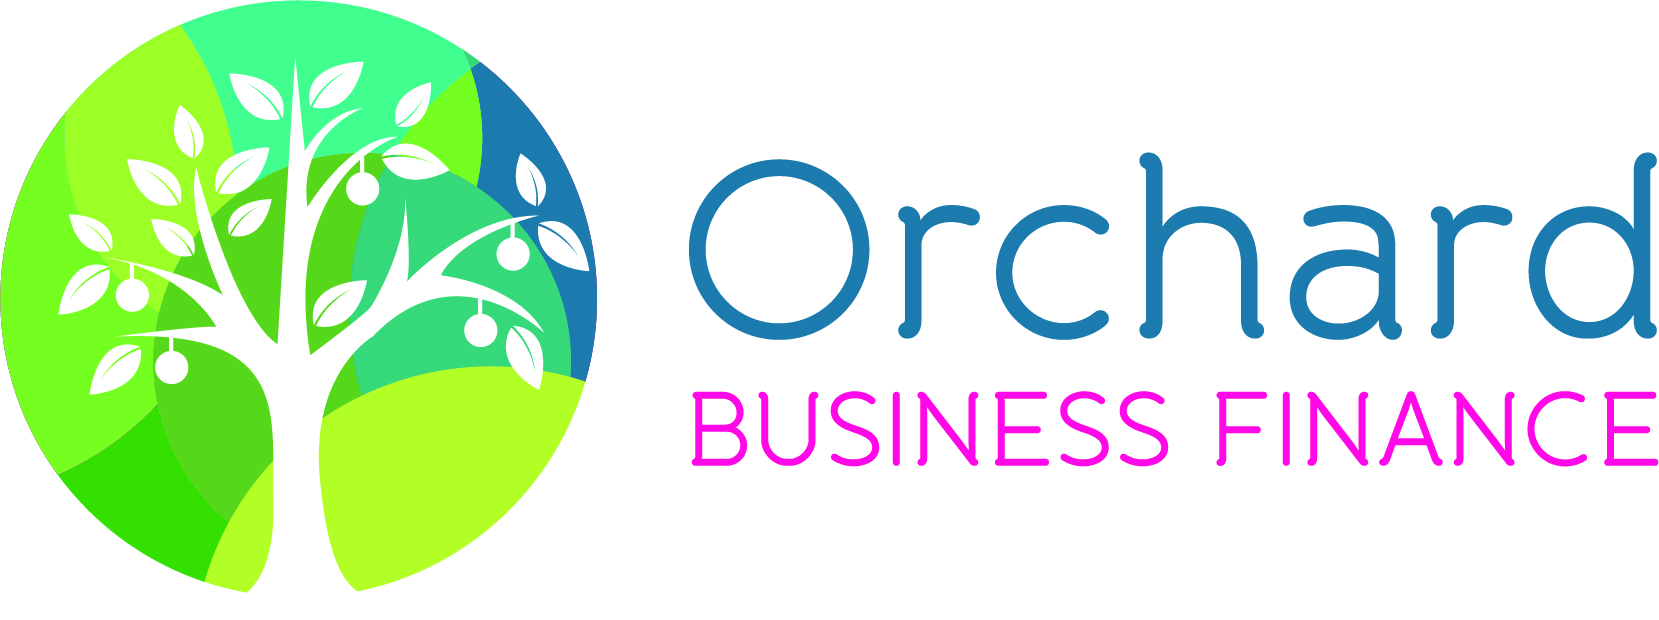 Orchard Business Finance